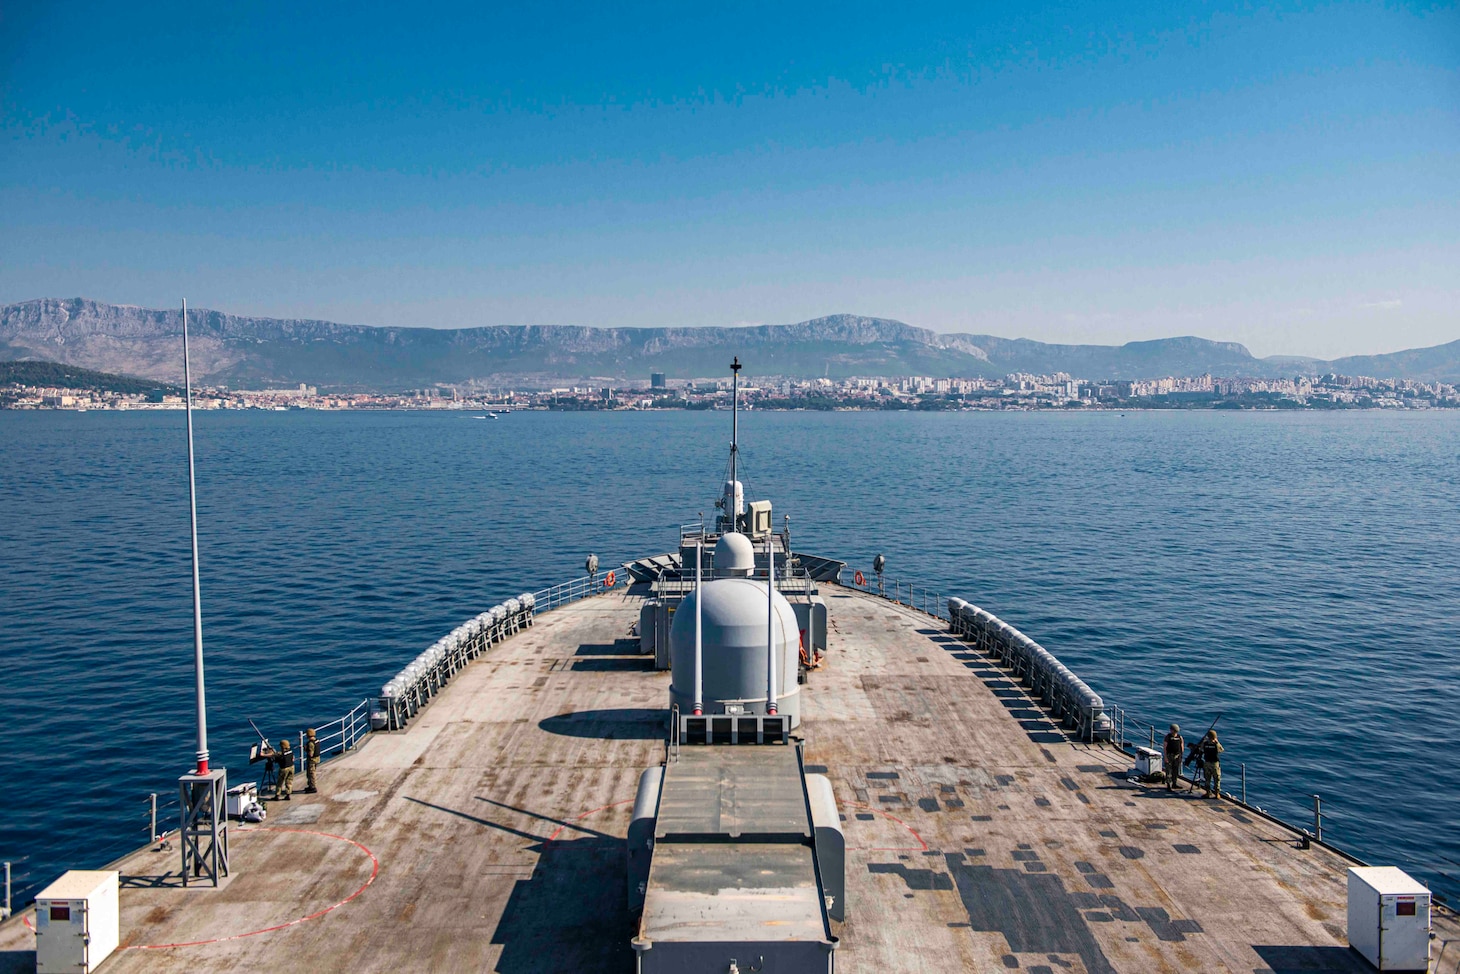 The Blue Ridge-class command and control ship USS Mount Whitney (LCC 20) and staff make port in Split, Croatia, July 30, 2021. Mount Whitney is the U.S. Sixth Fleet flagship, homeported in Gaeta, and operates with a combined crew of U.S. Sailors and Military Sealift Command civil service mariners.